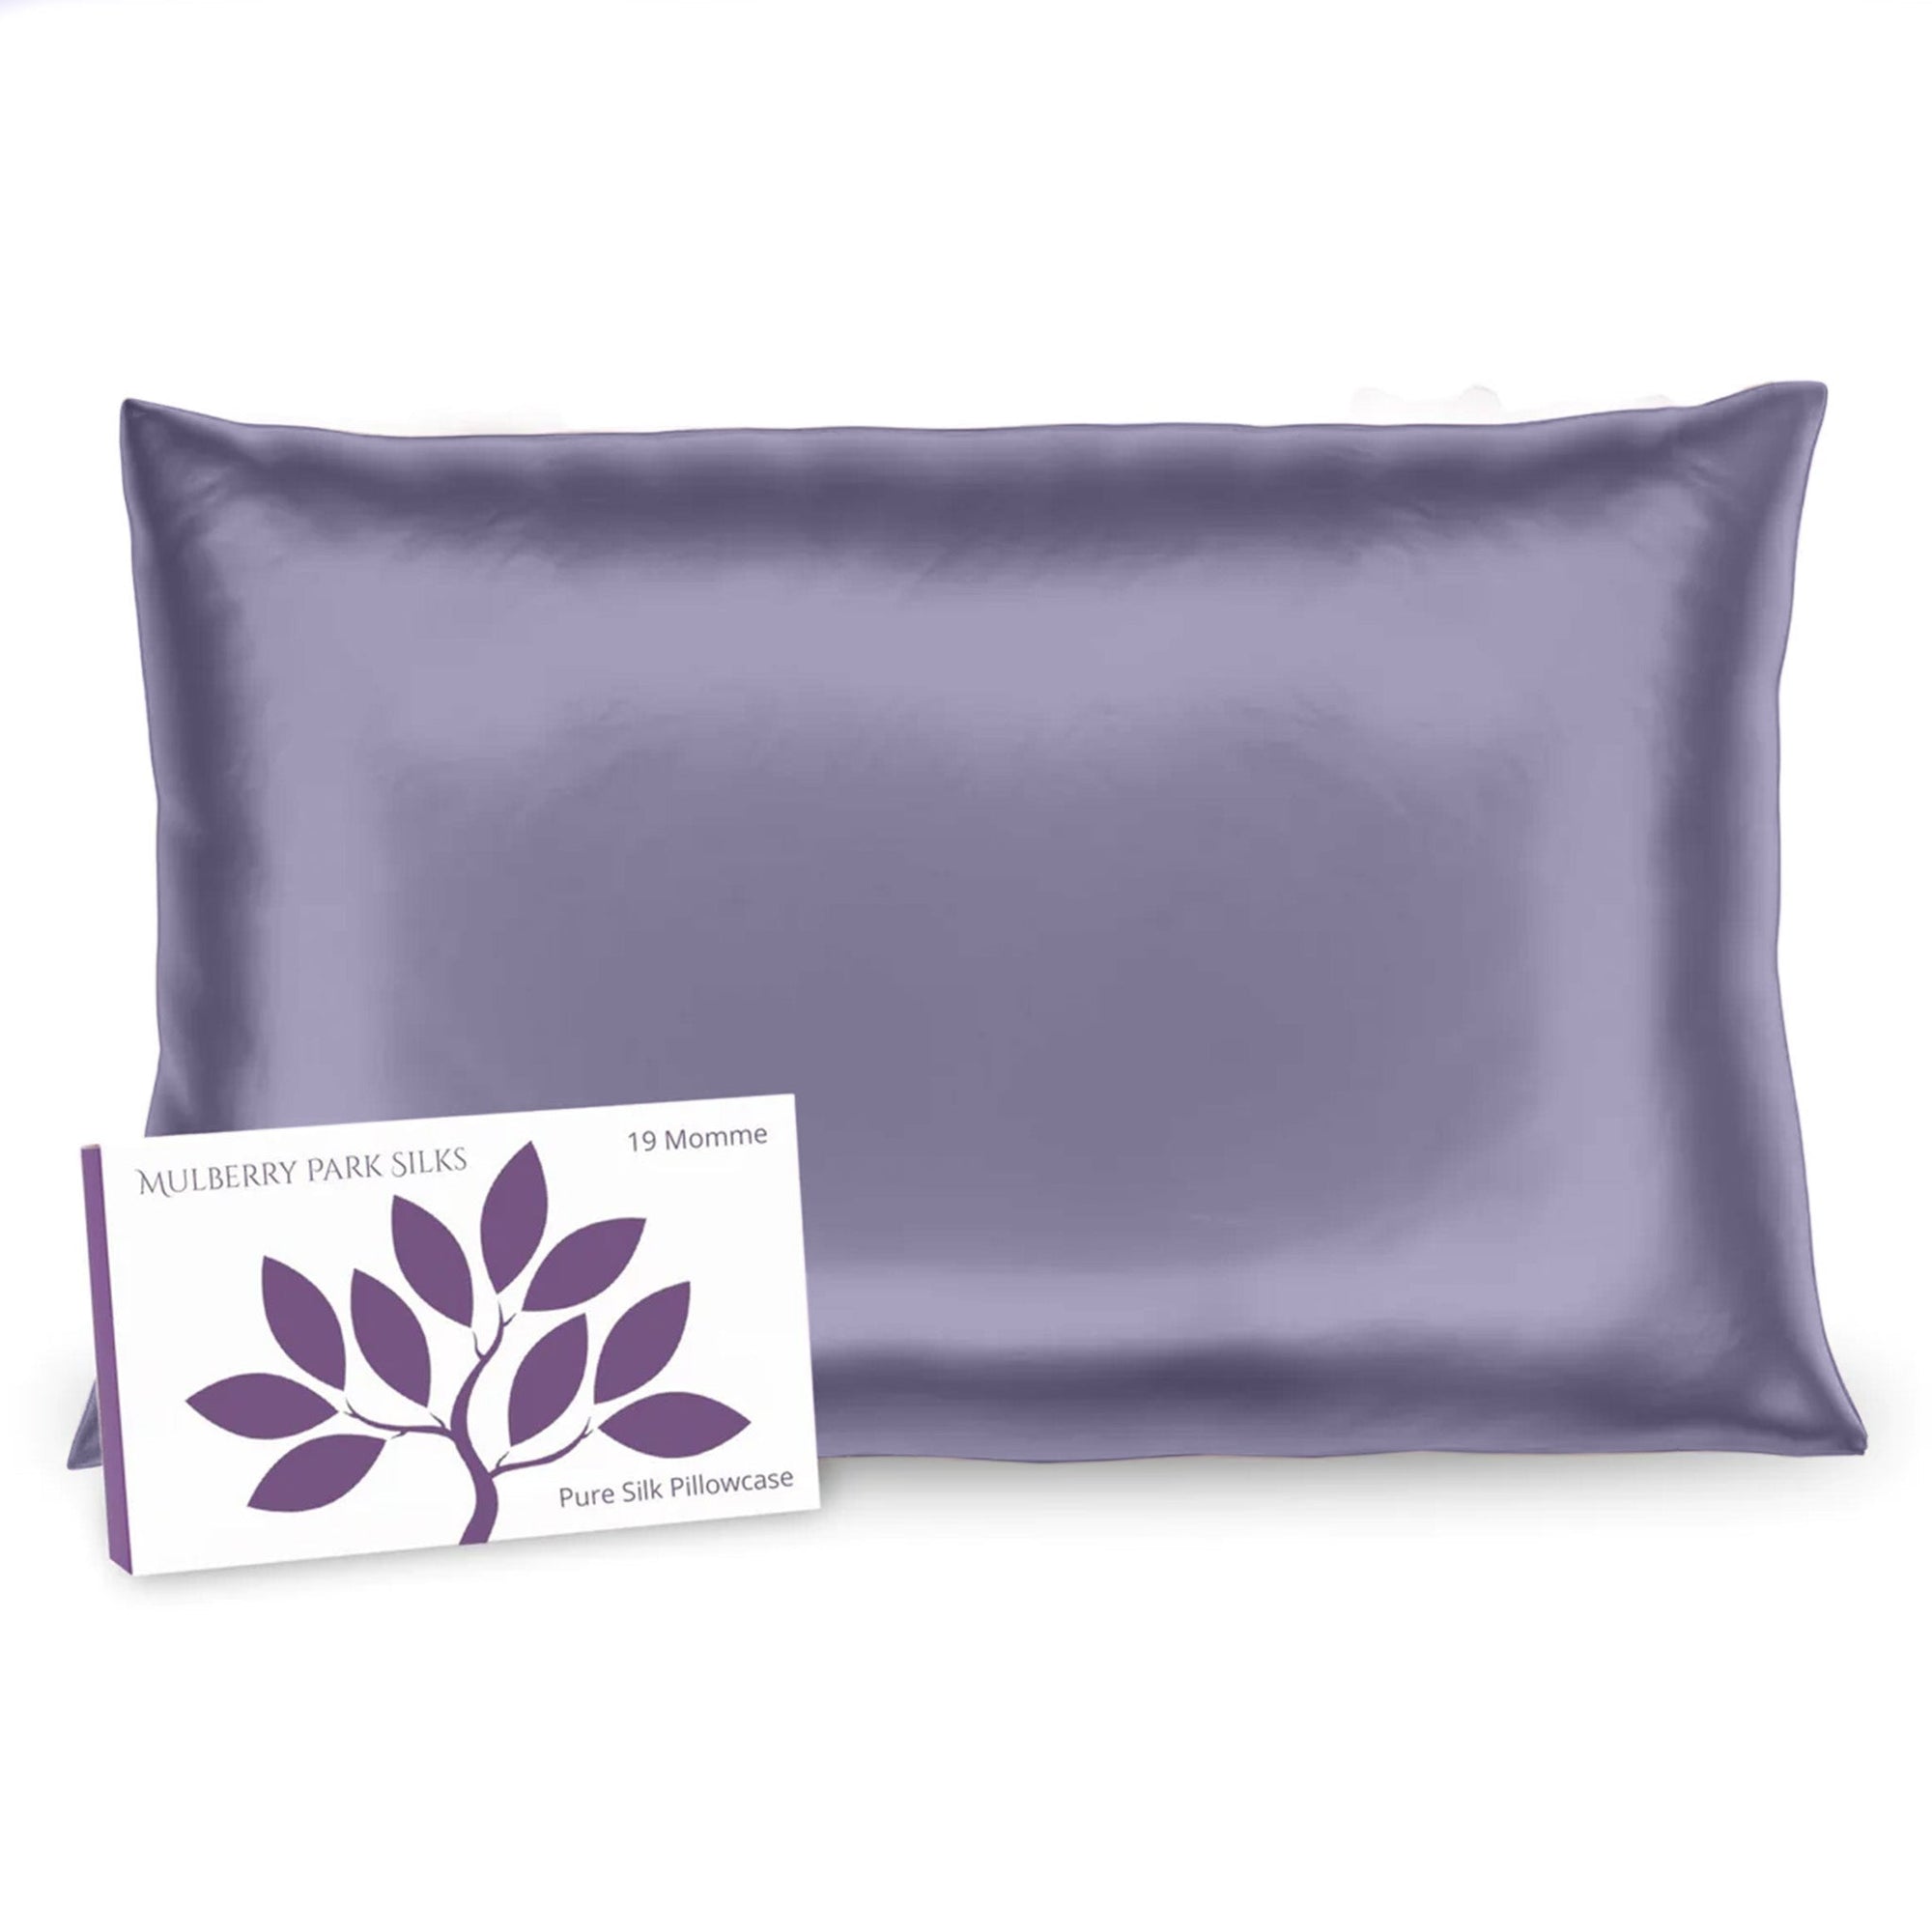 Hidden Zipper of Mulberry Park Silks Deluxe 19 Momme Pure Silk Pillowcase in Lilac Color